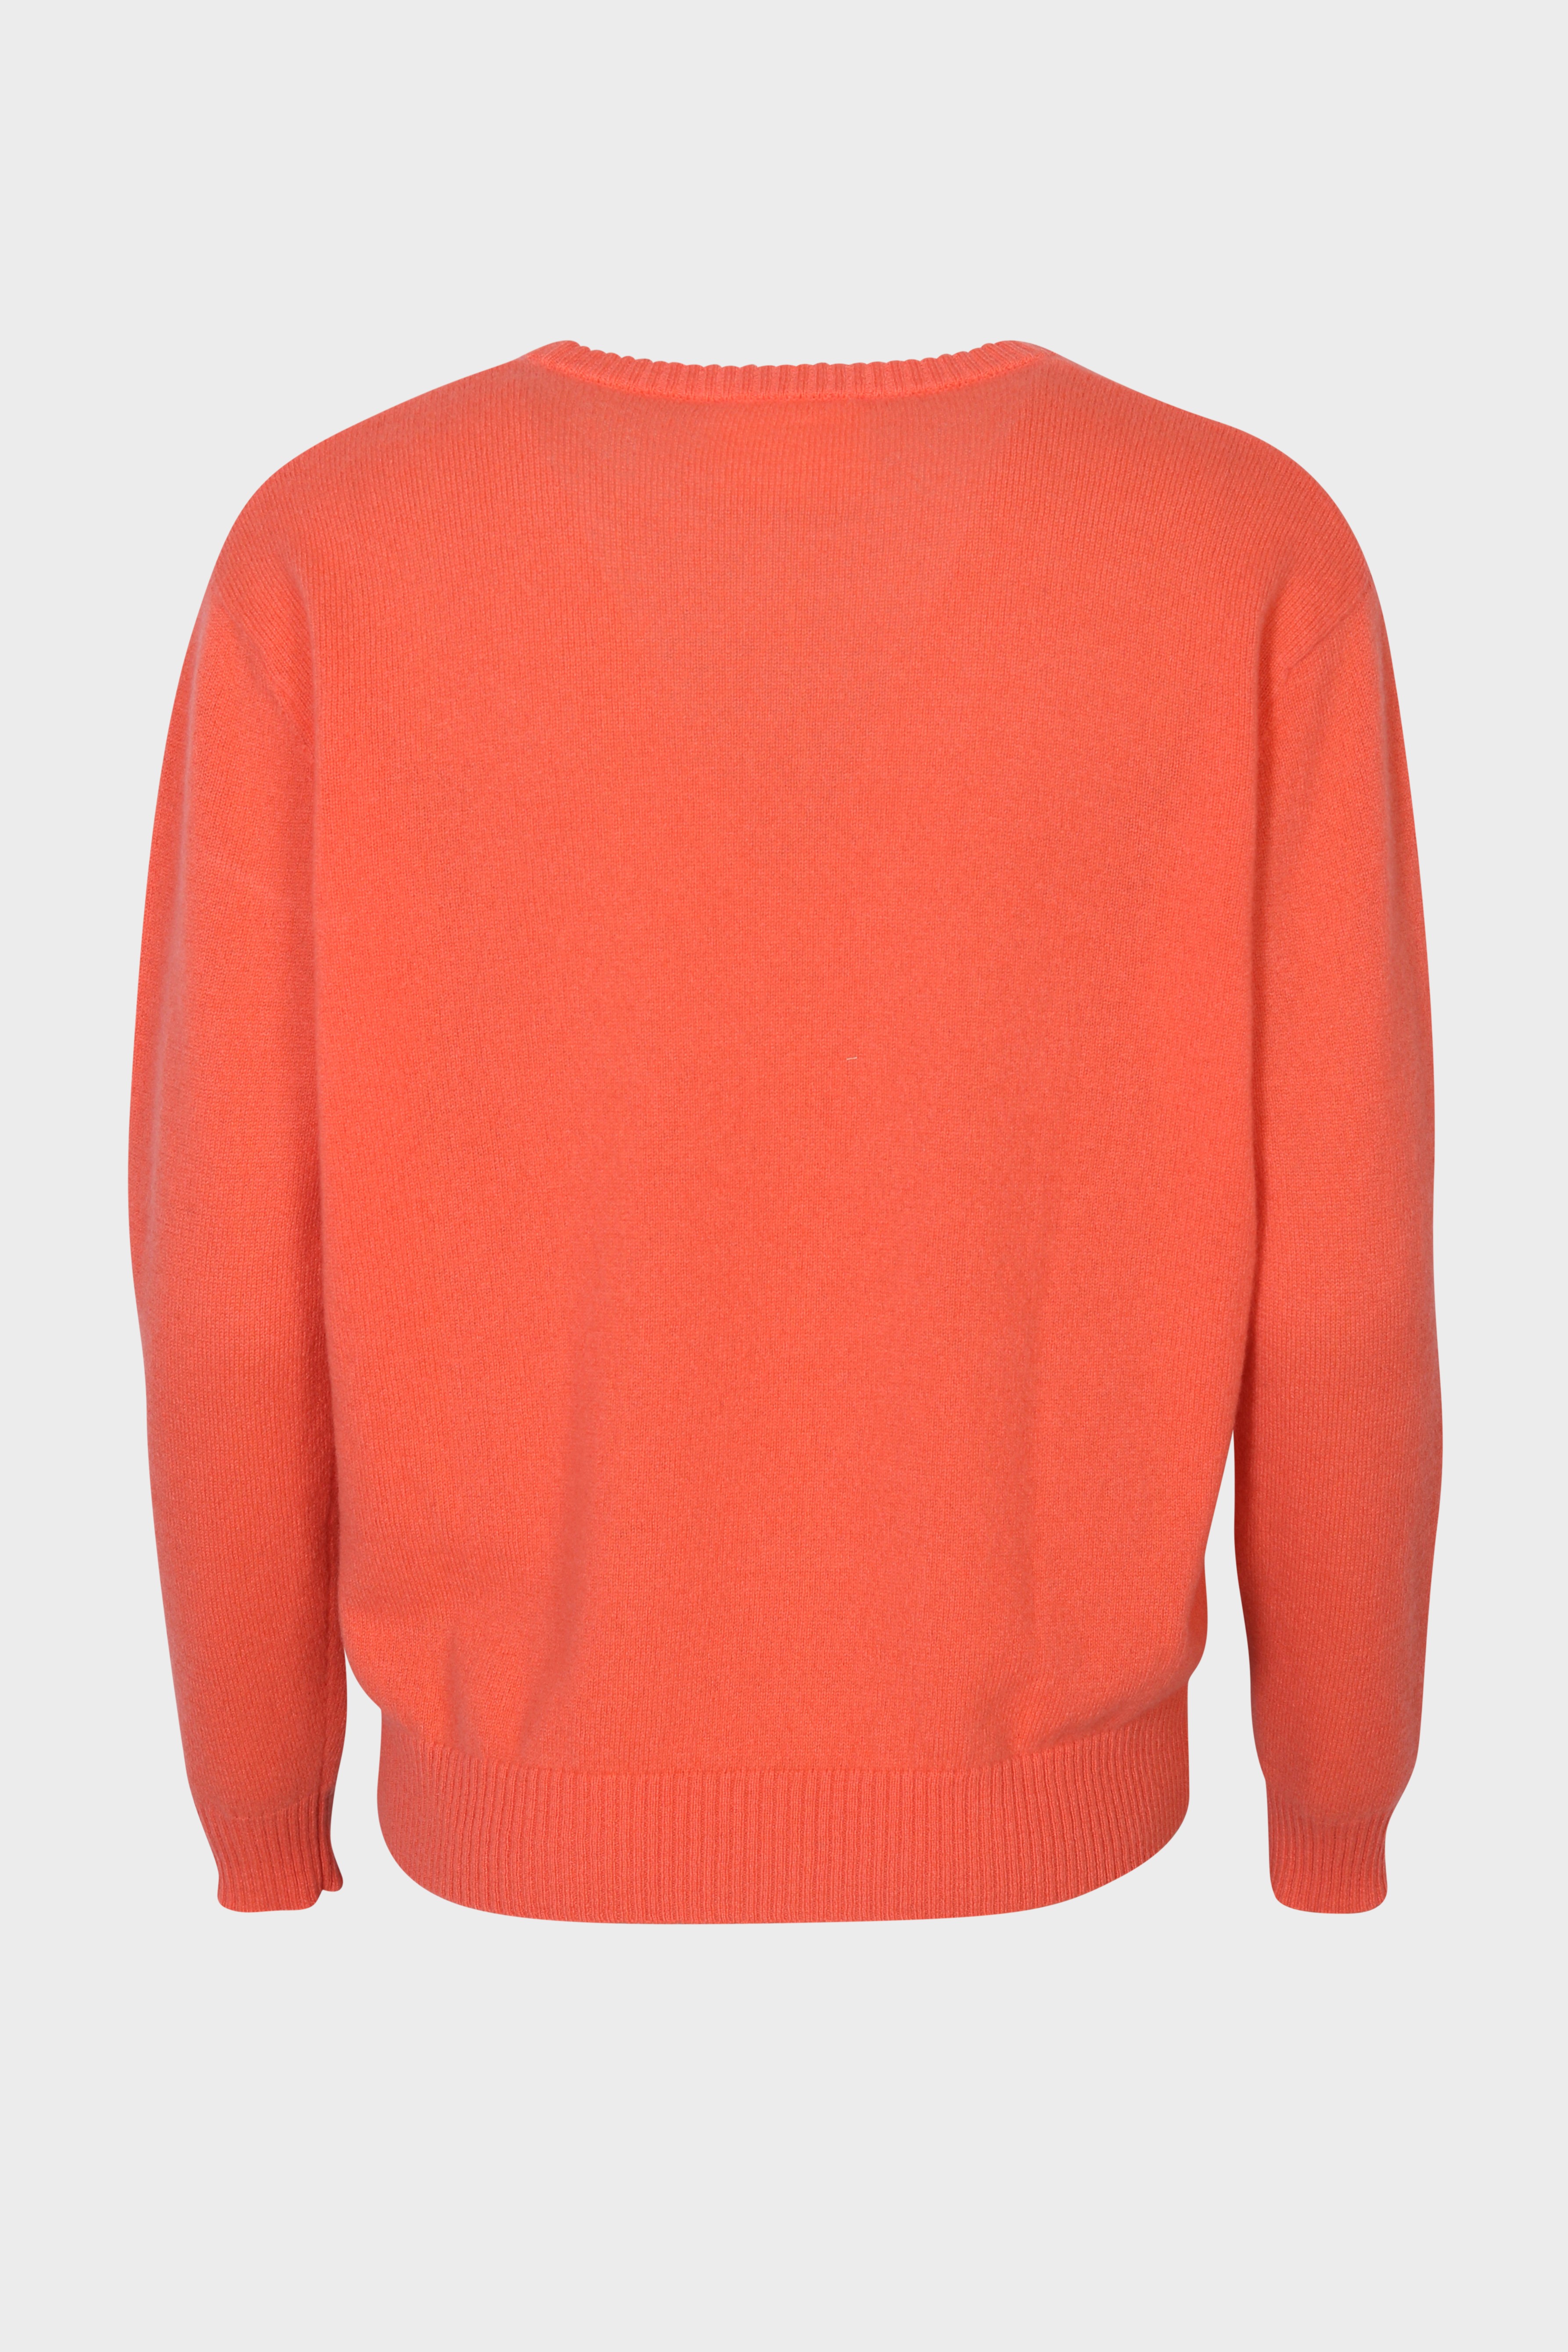 ABSOLUT CASHMERE Sweater Ysee Melon M